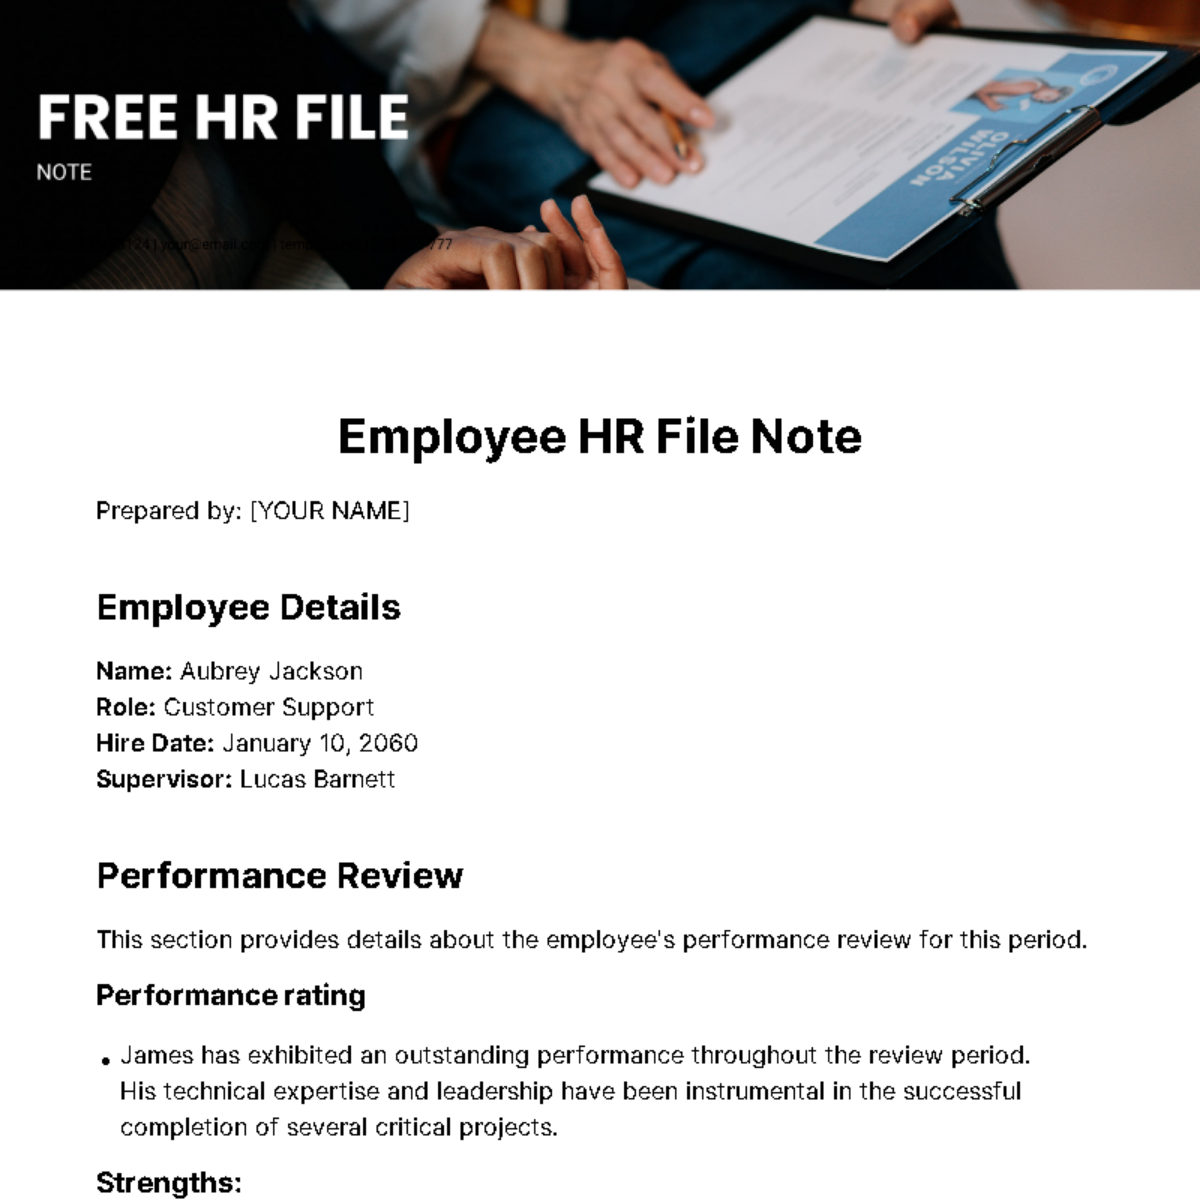 Free HR File Note Template